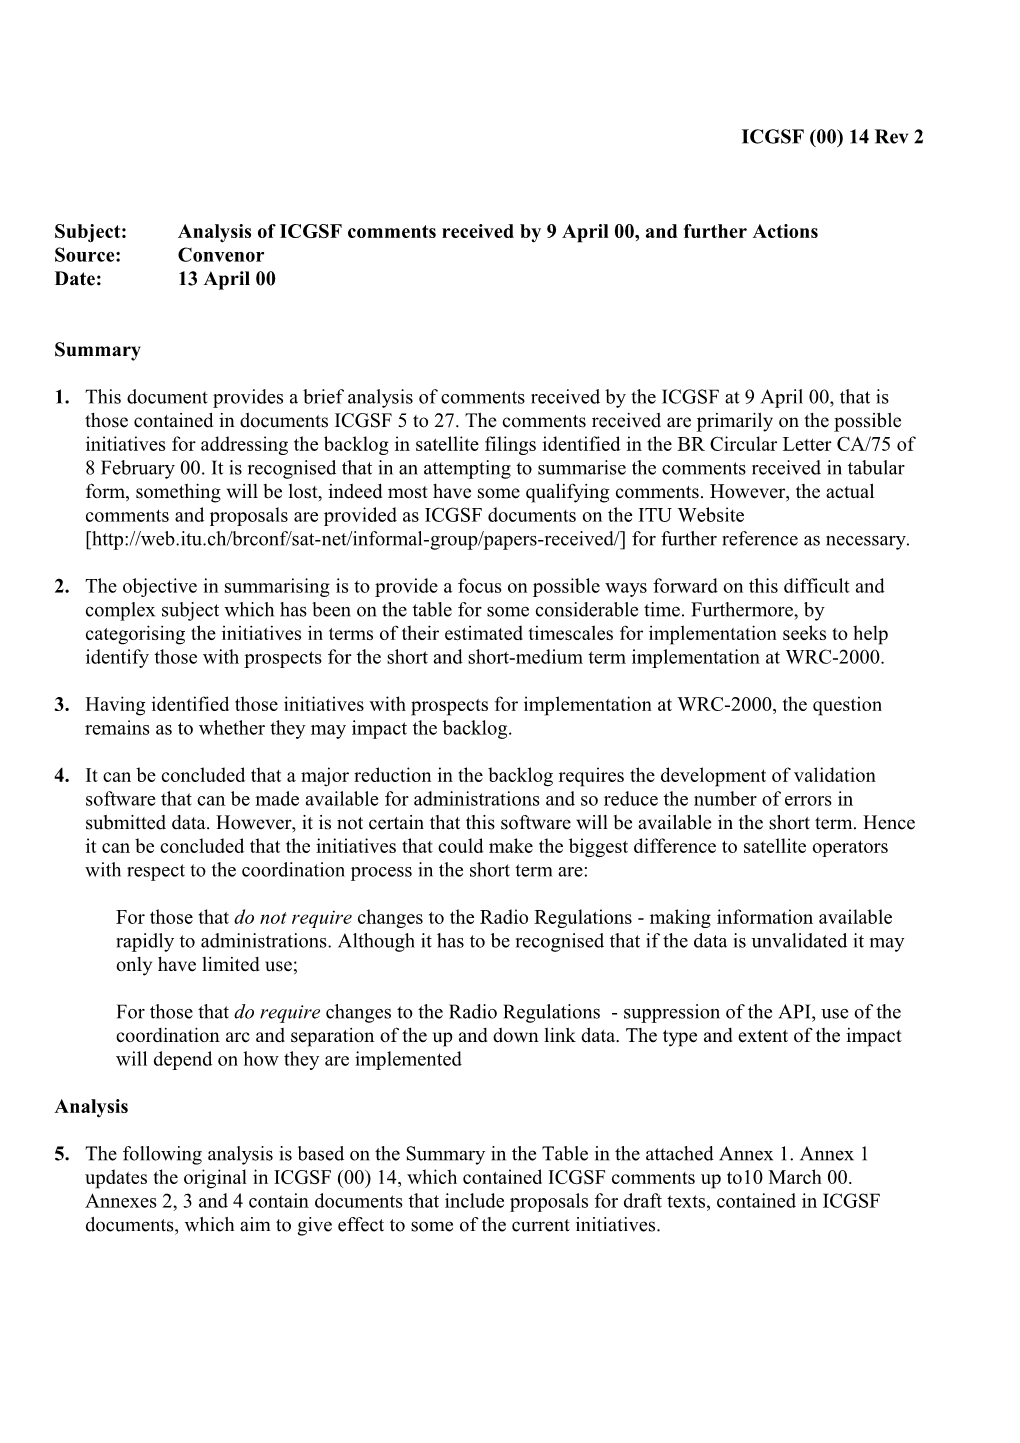 Subject: Analysis of ICGSF Comments Received by 9 April 00, and Further Actions